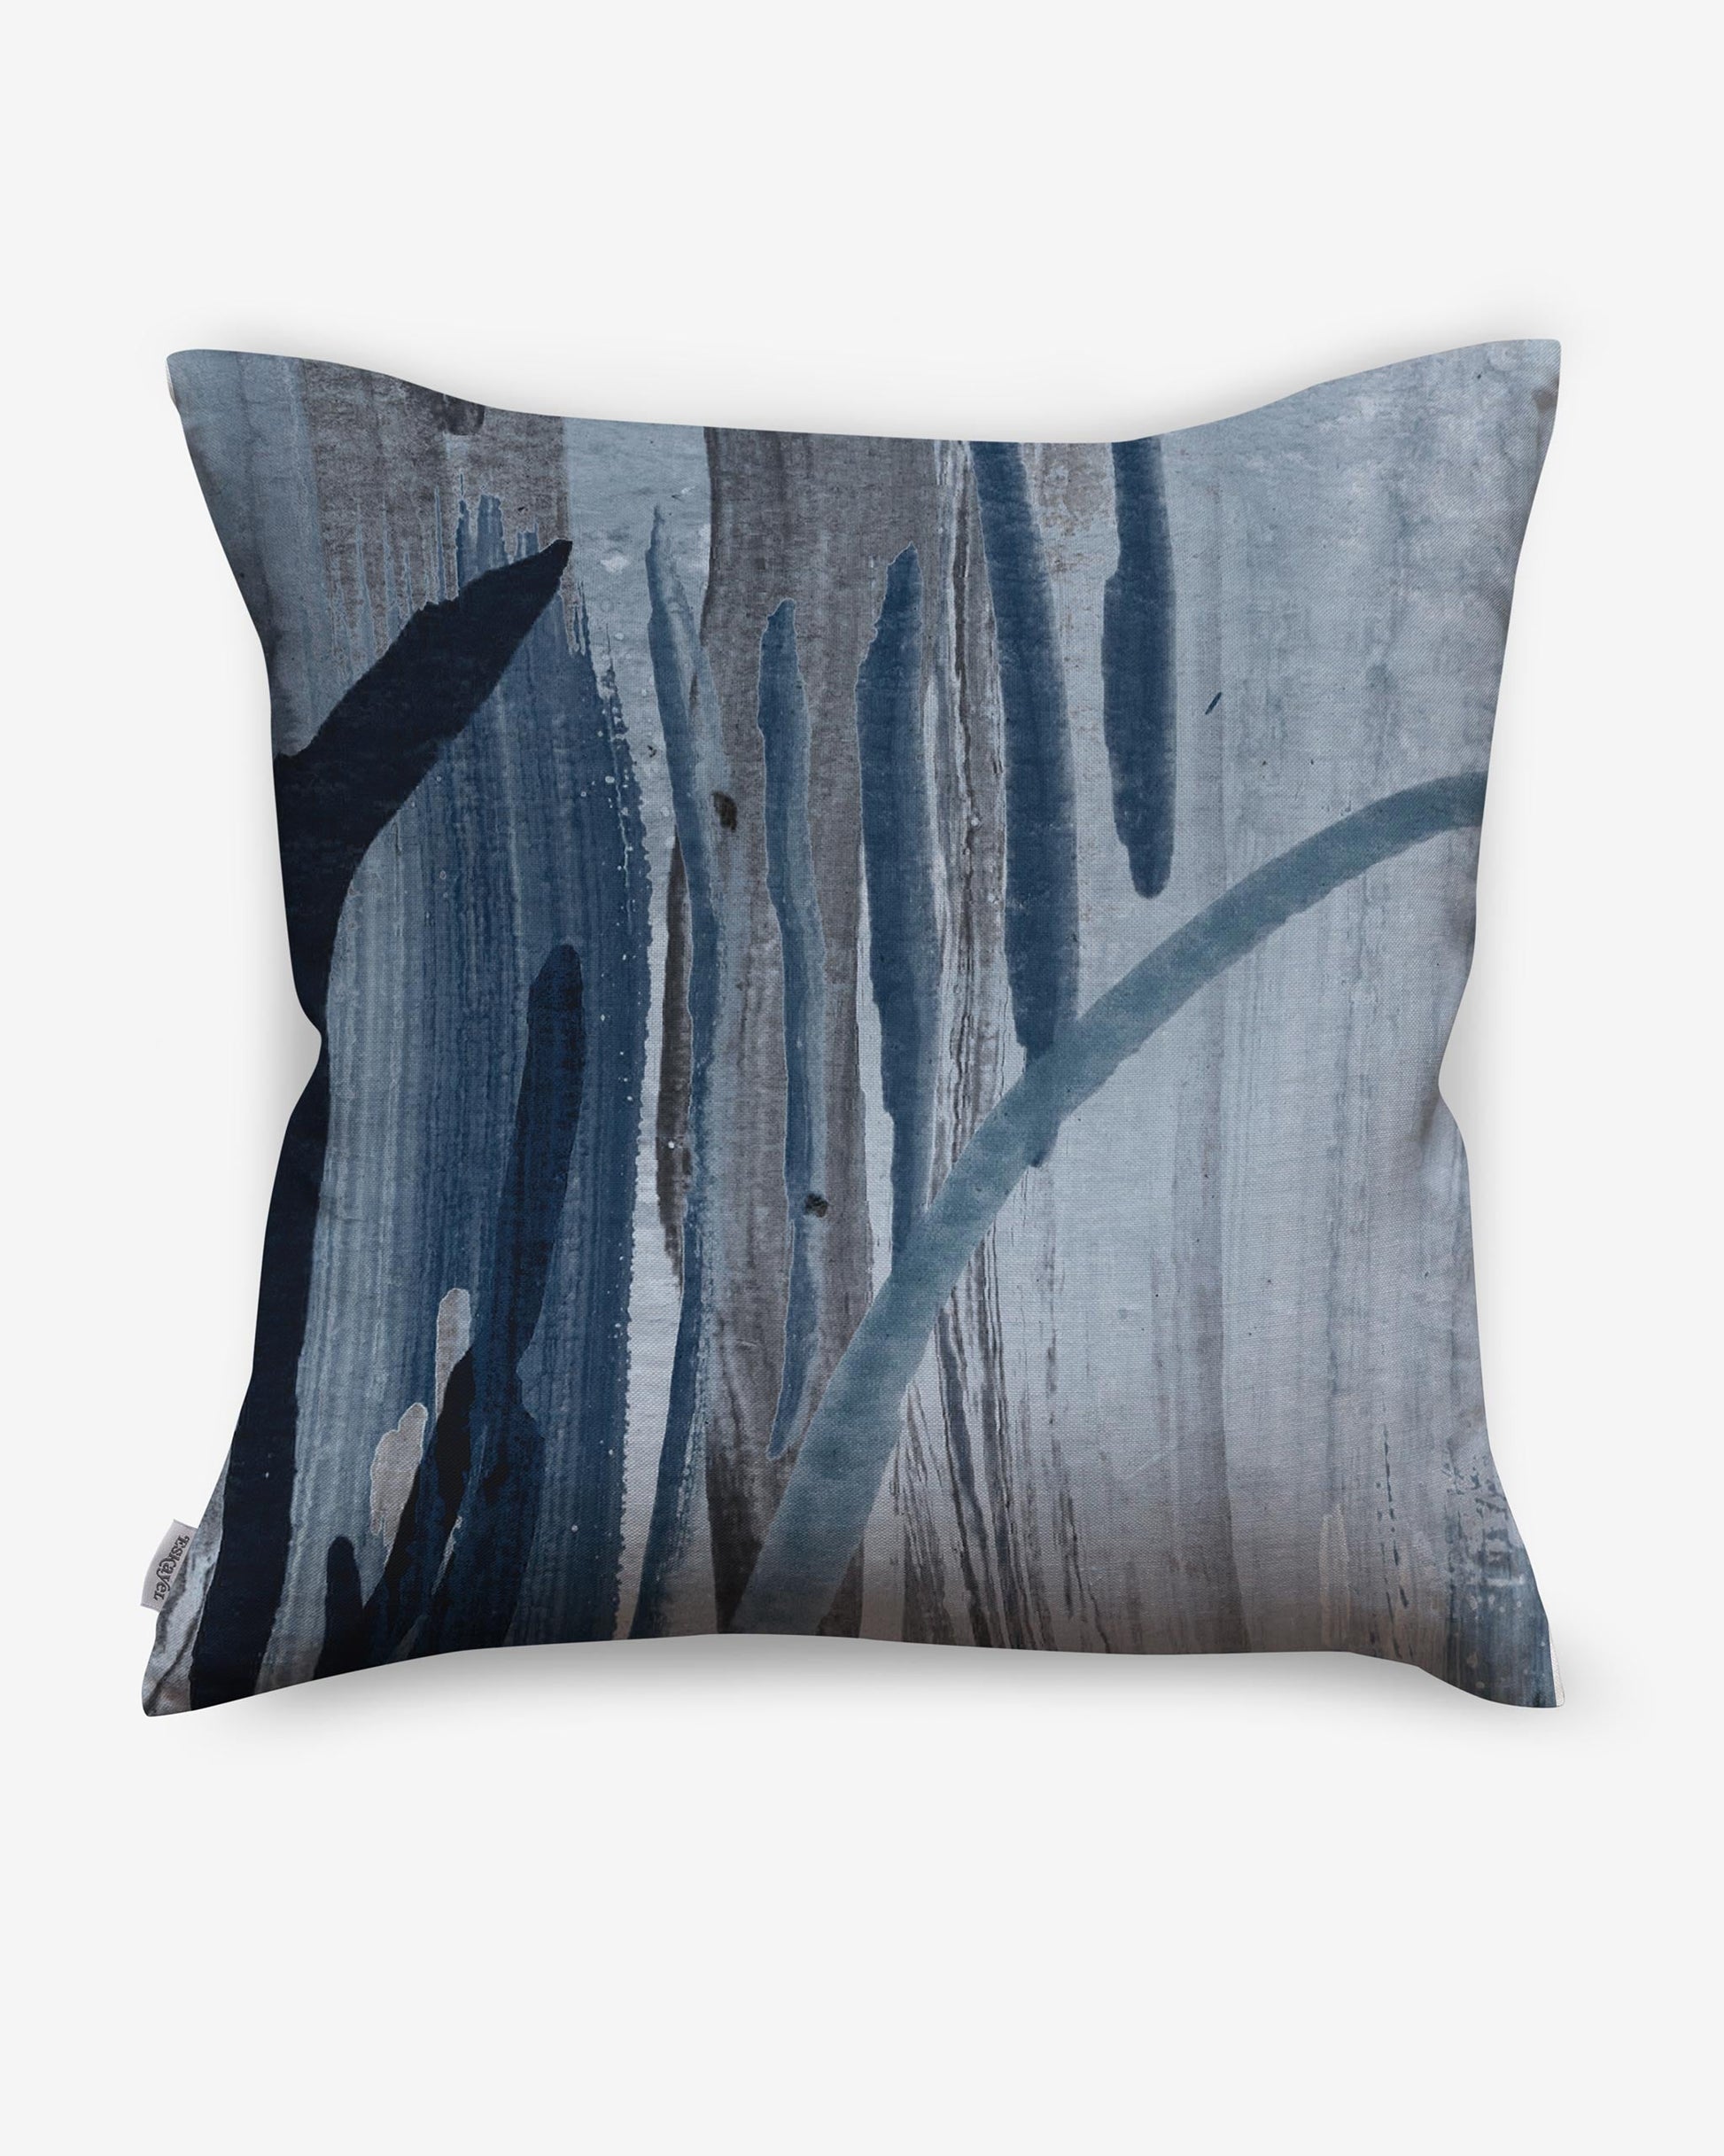 A pillow with a luxurious blue and gray painting inspired by Majorelle gardens in Morocco, named Majorelle Pillow Cyrrus